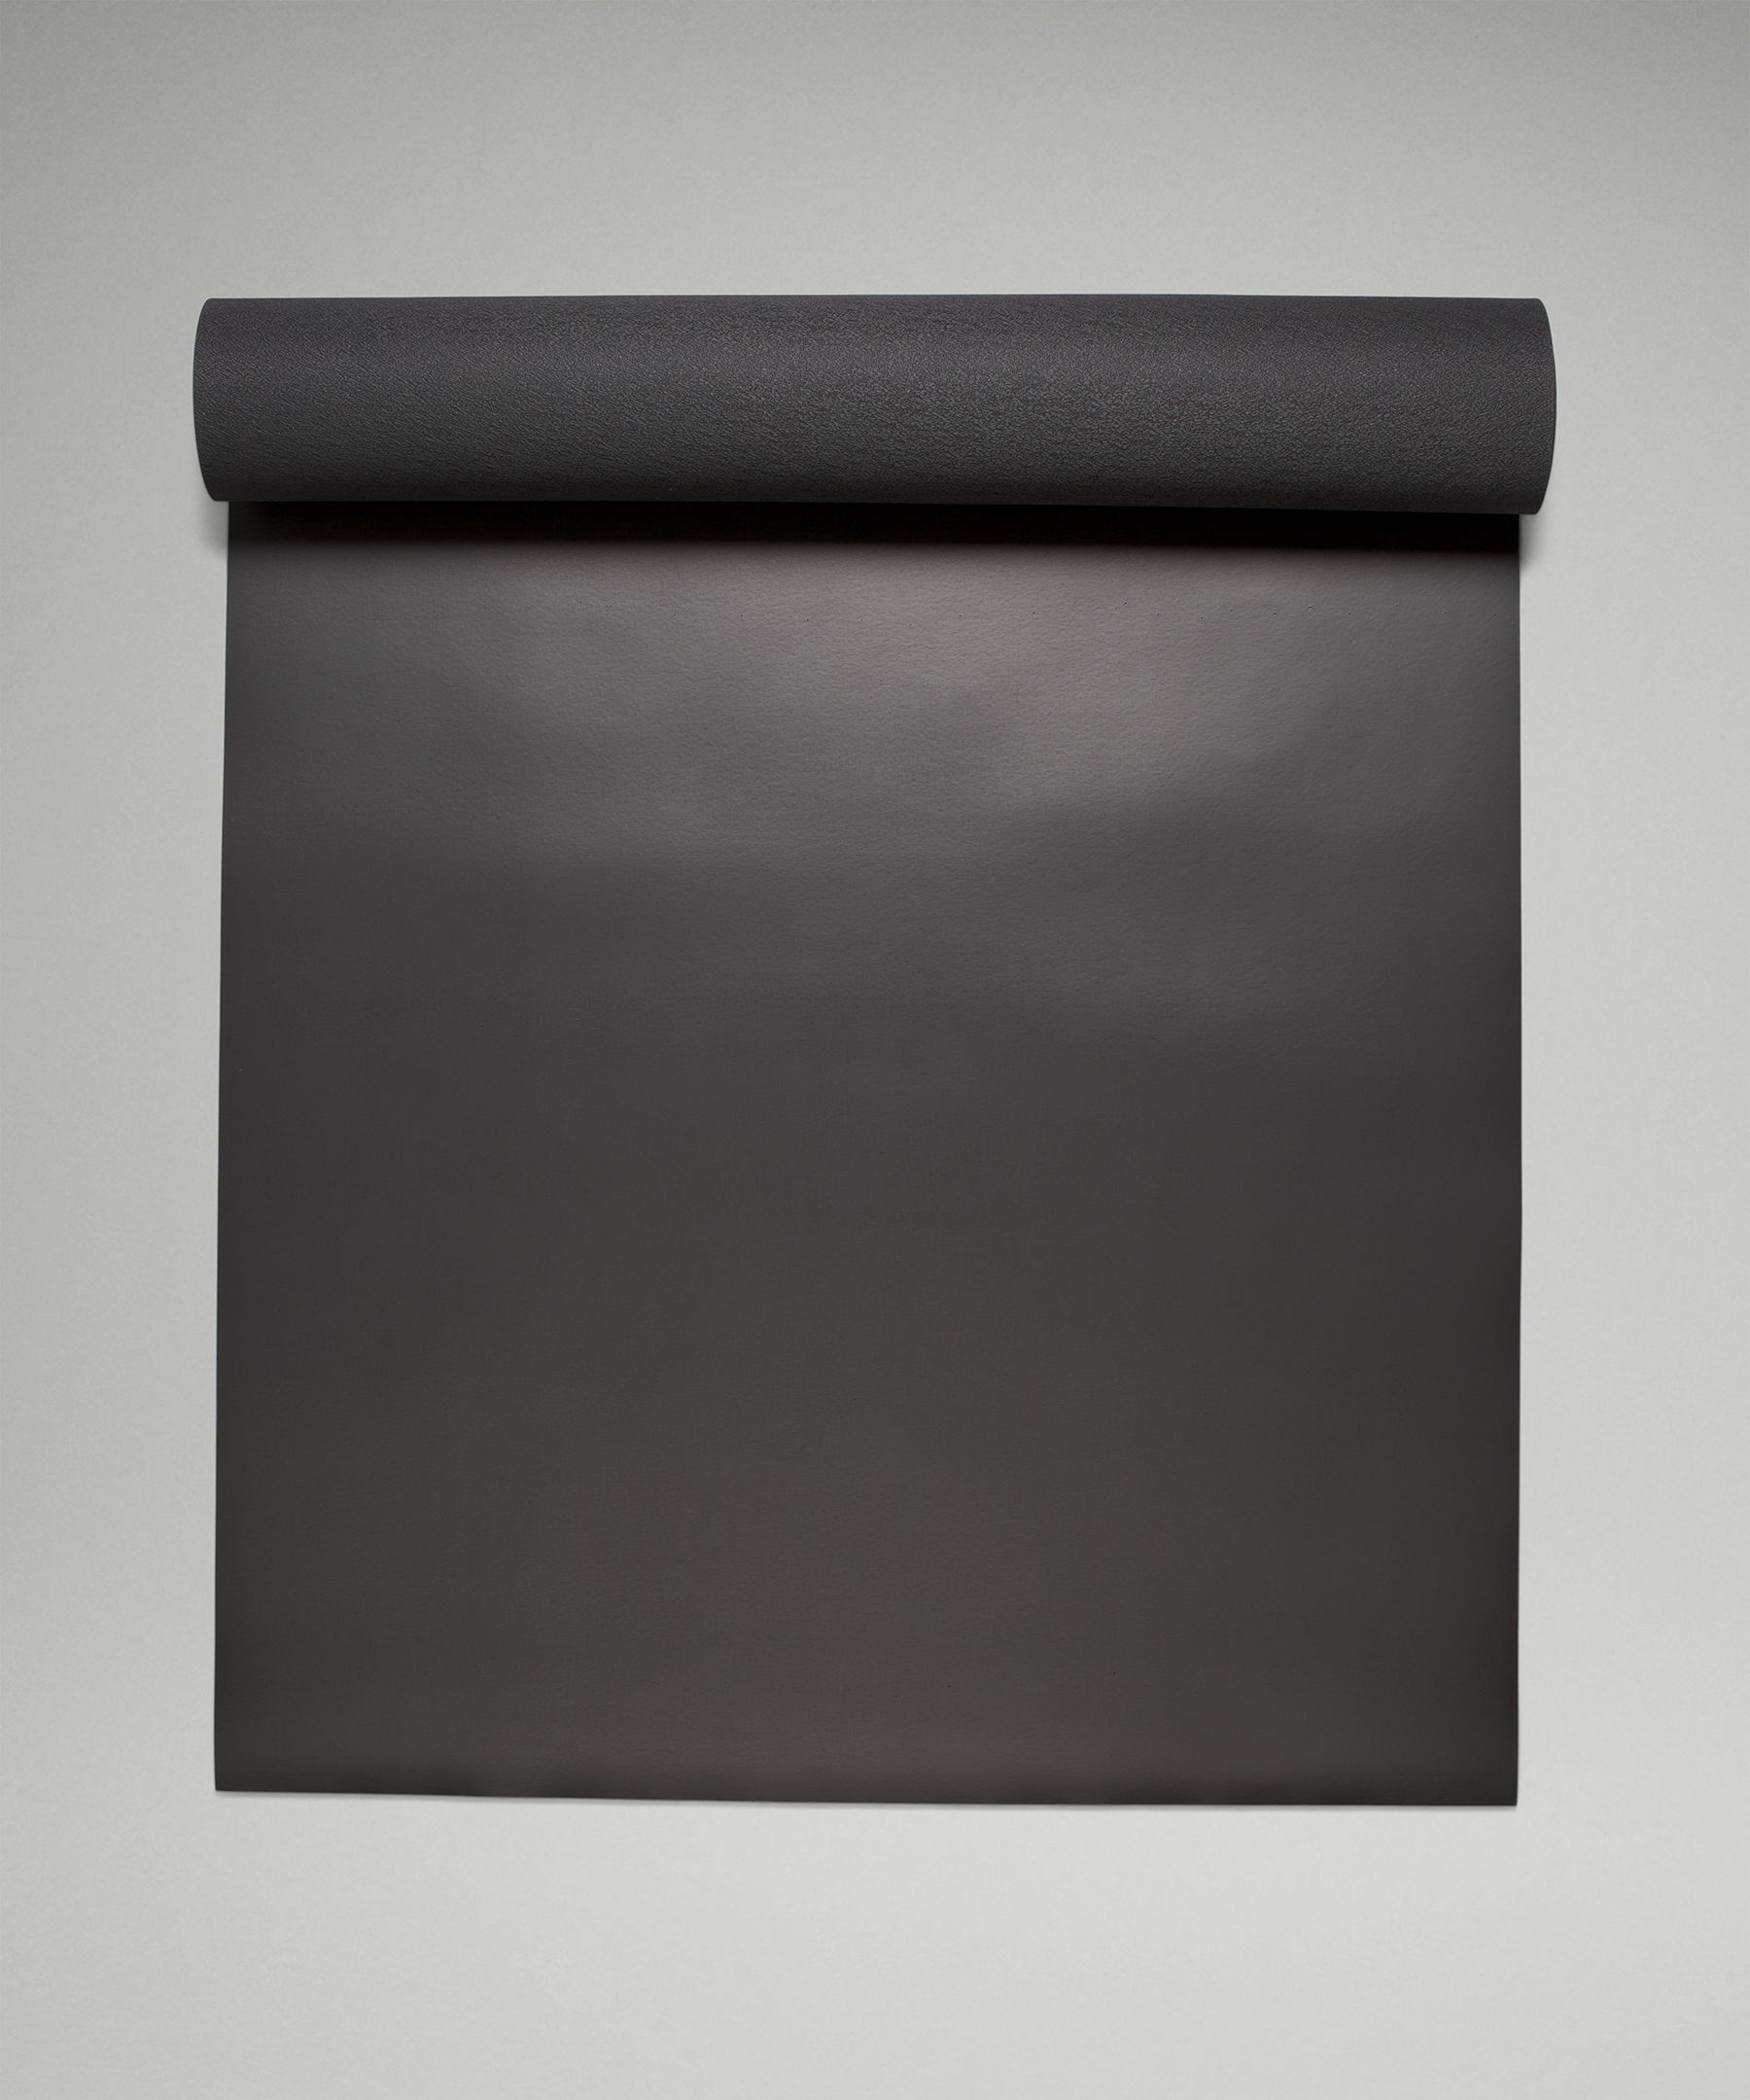 Lululemon The Mat 5mm Made With FSC-Certified Rubber